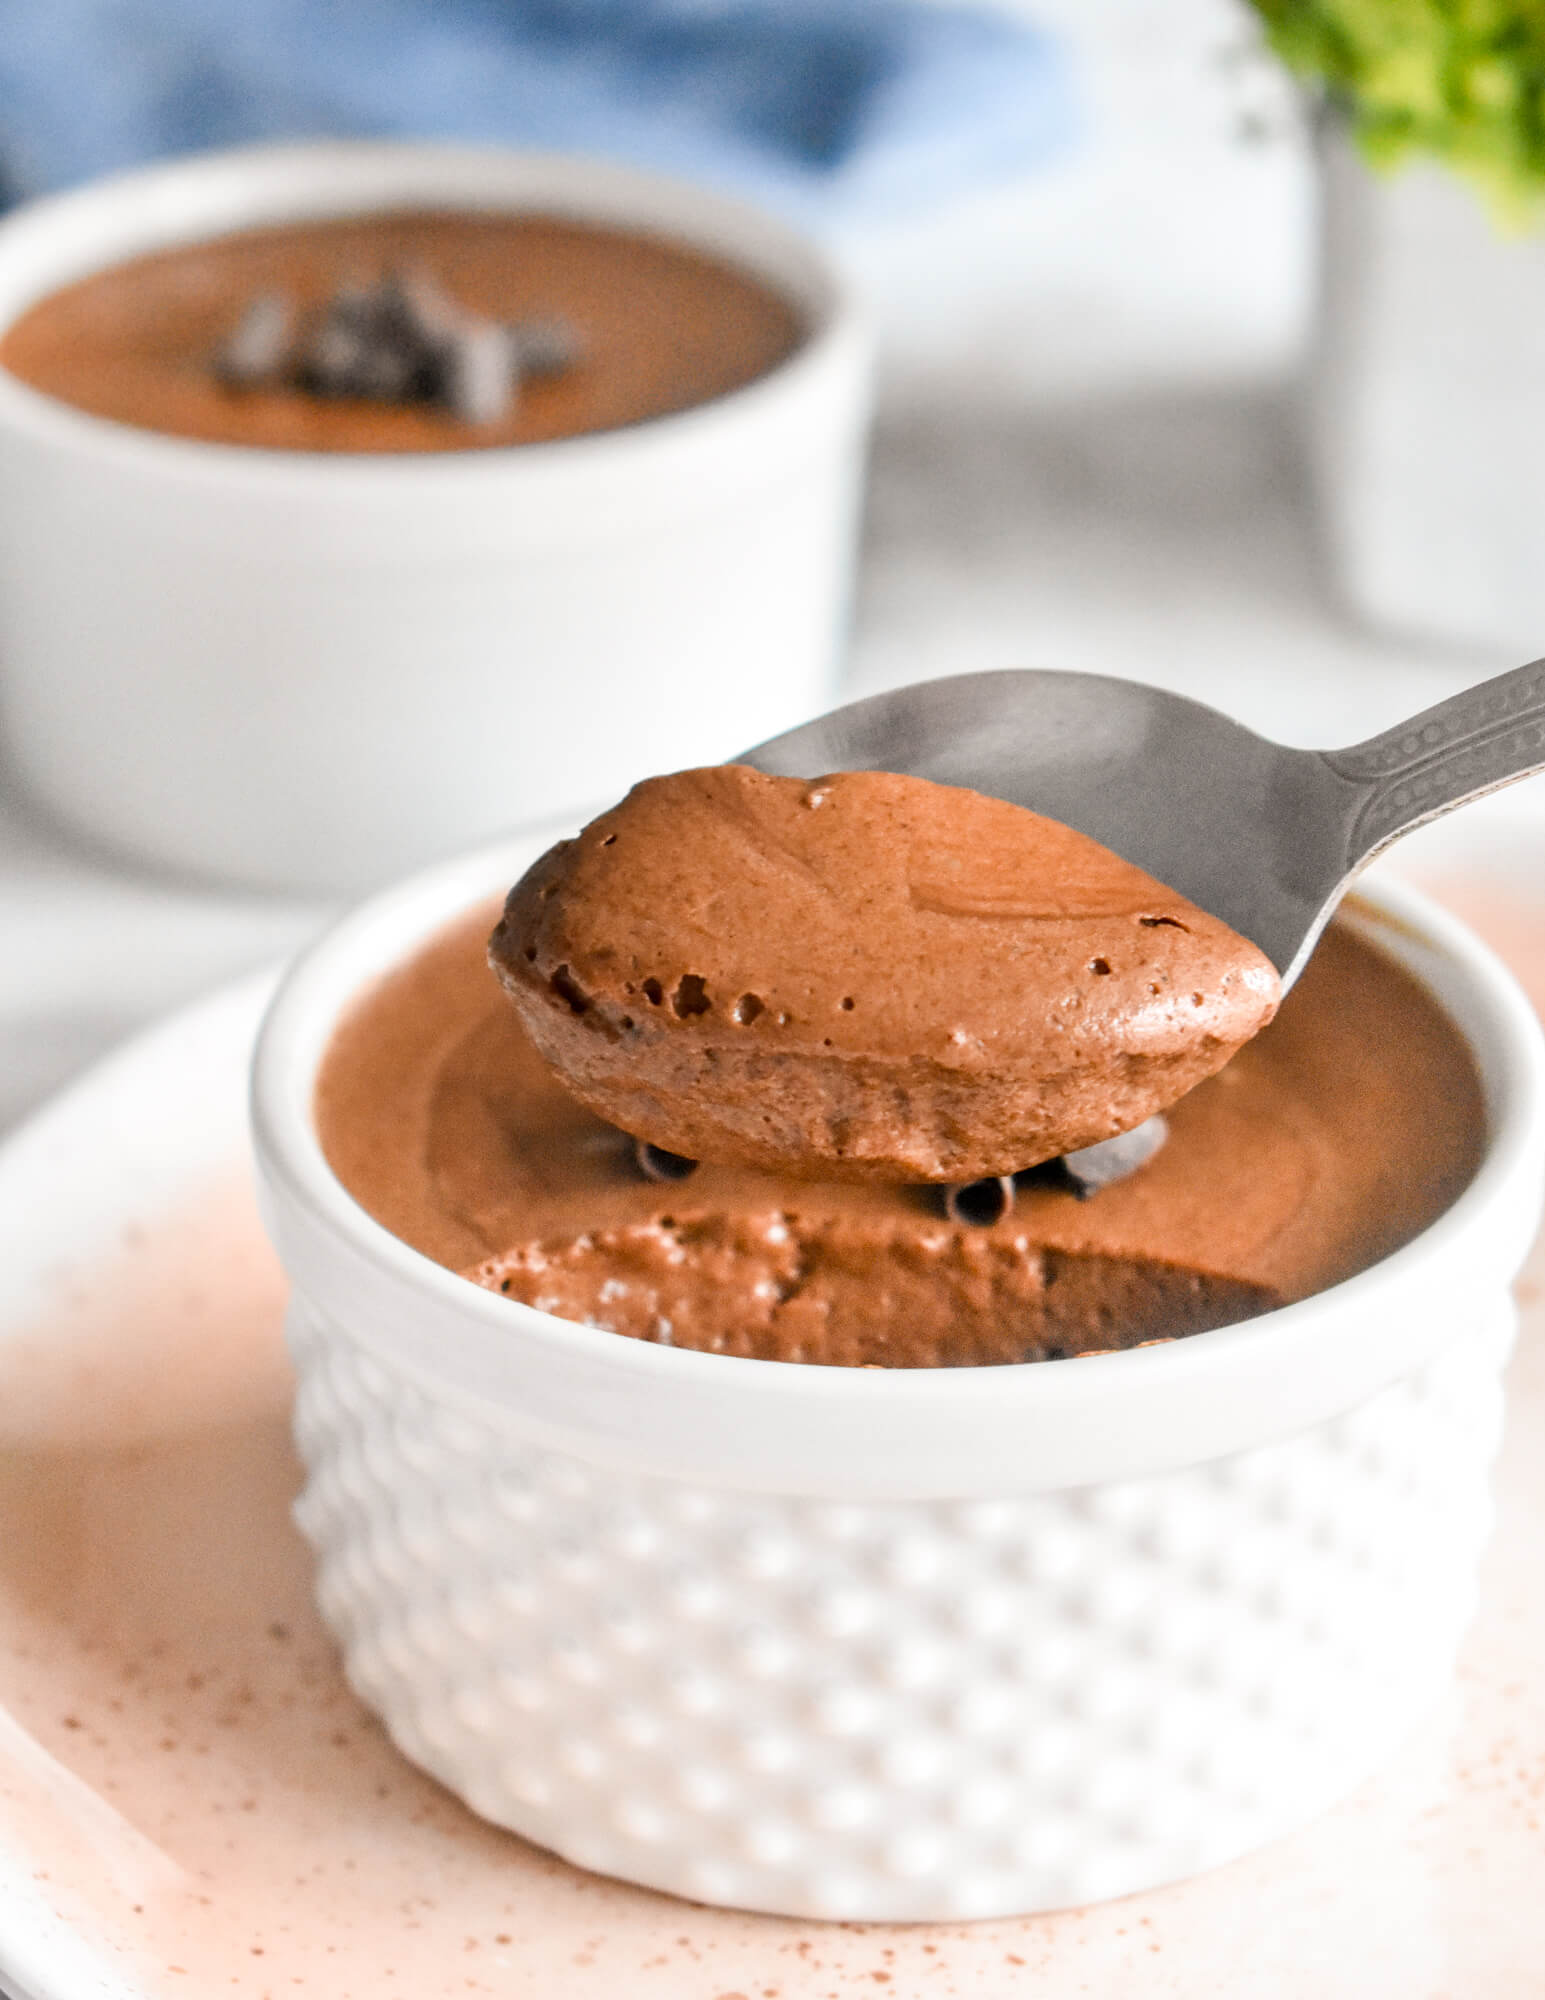 A spoon scooping some healthy aquafaba chocolate mousse from a ramekin.